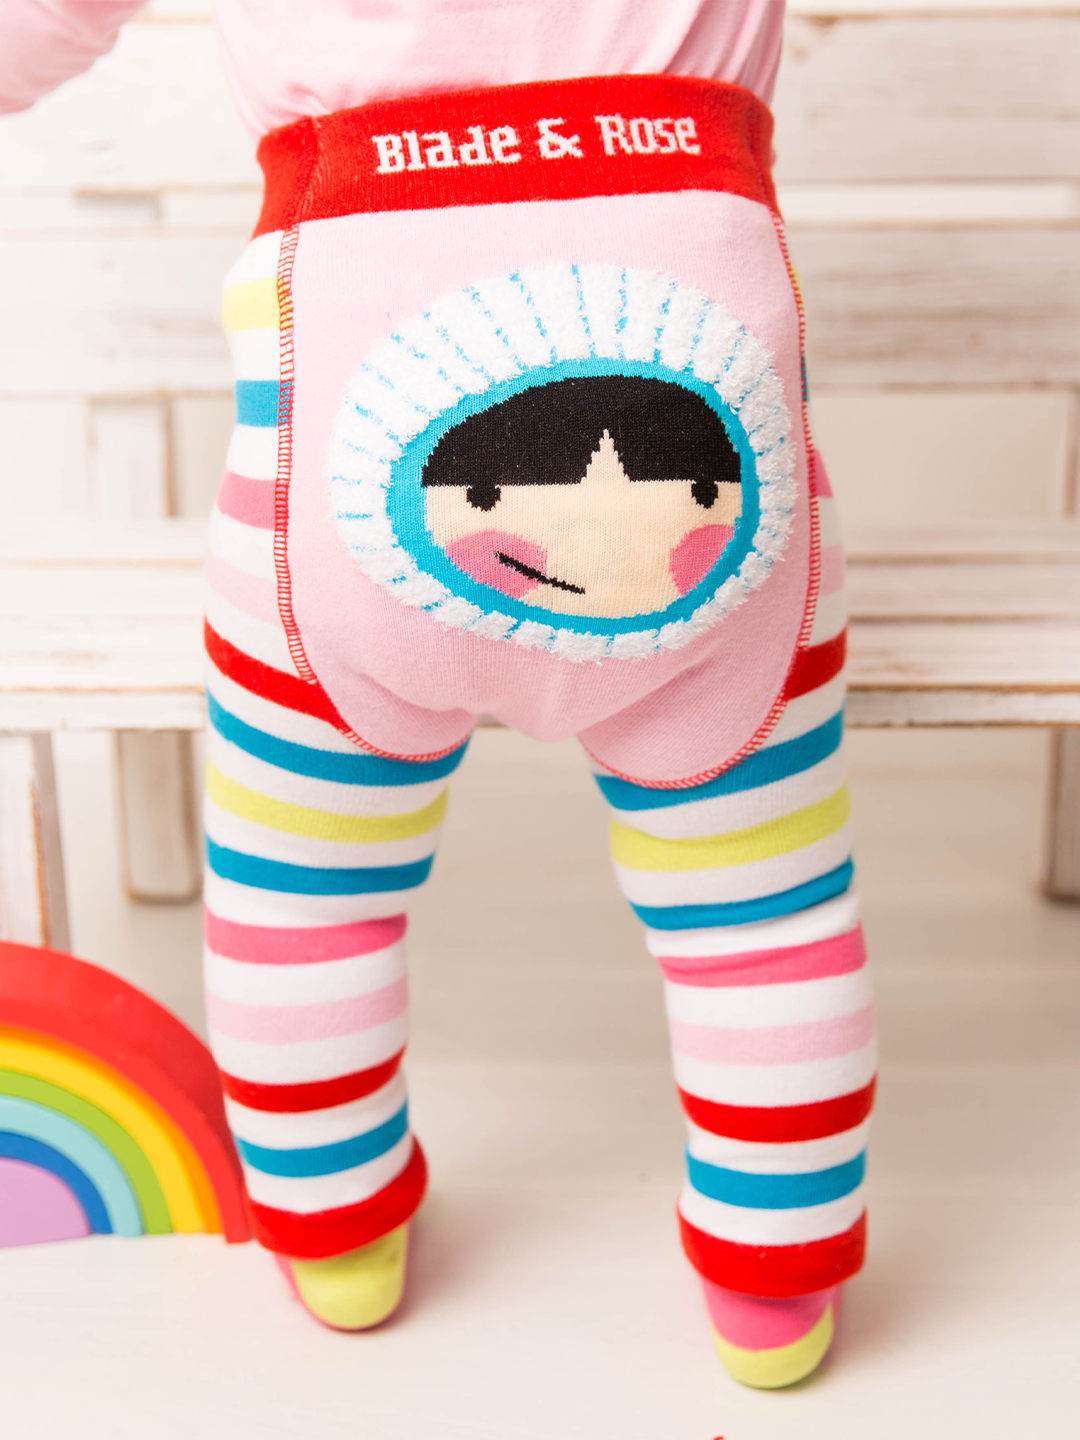 Blade and Rose Leggings for Babies and Toddlers — Chirpy, Leeds